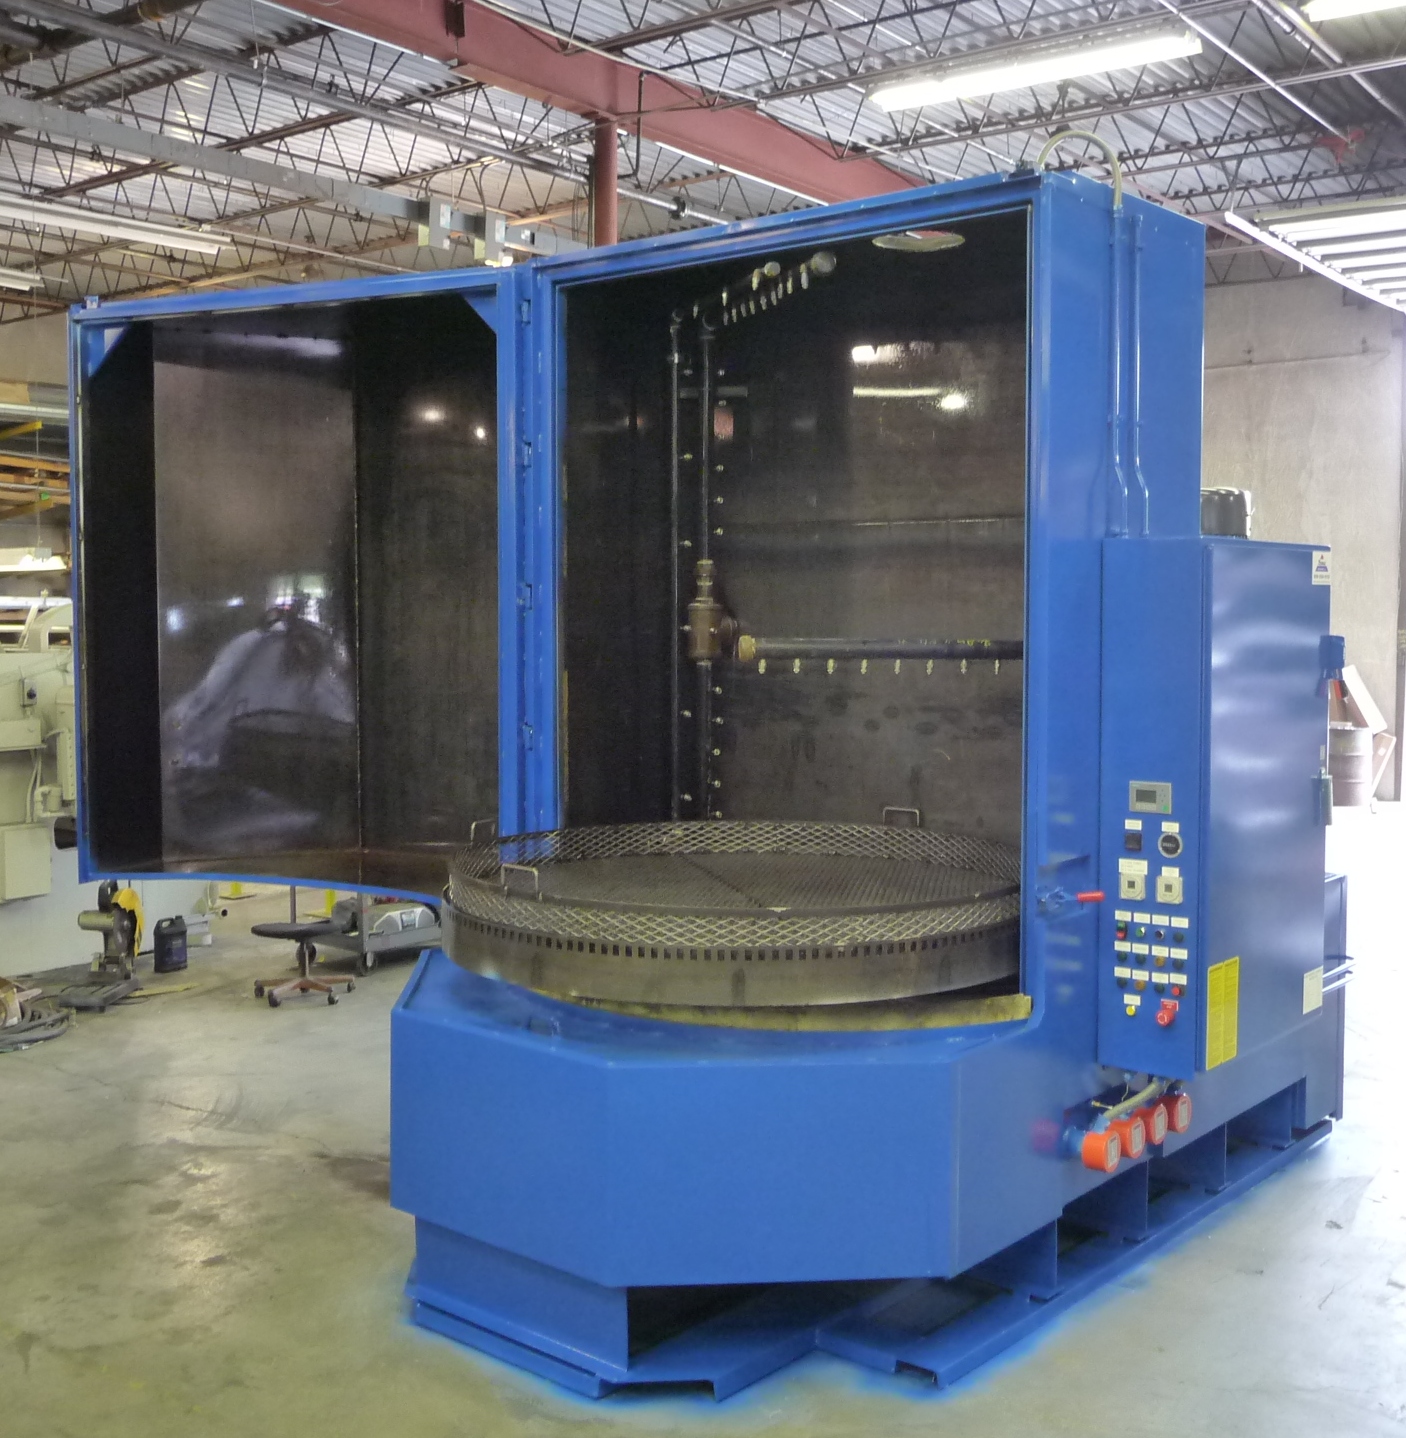 Extreme Klean Industrial Parts Washer Manufacturer | Trimac Systems